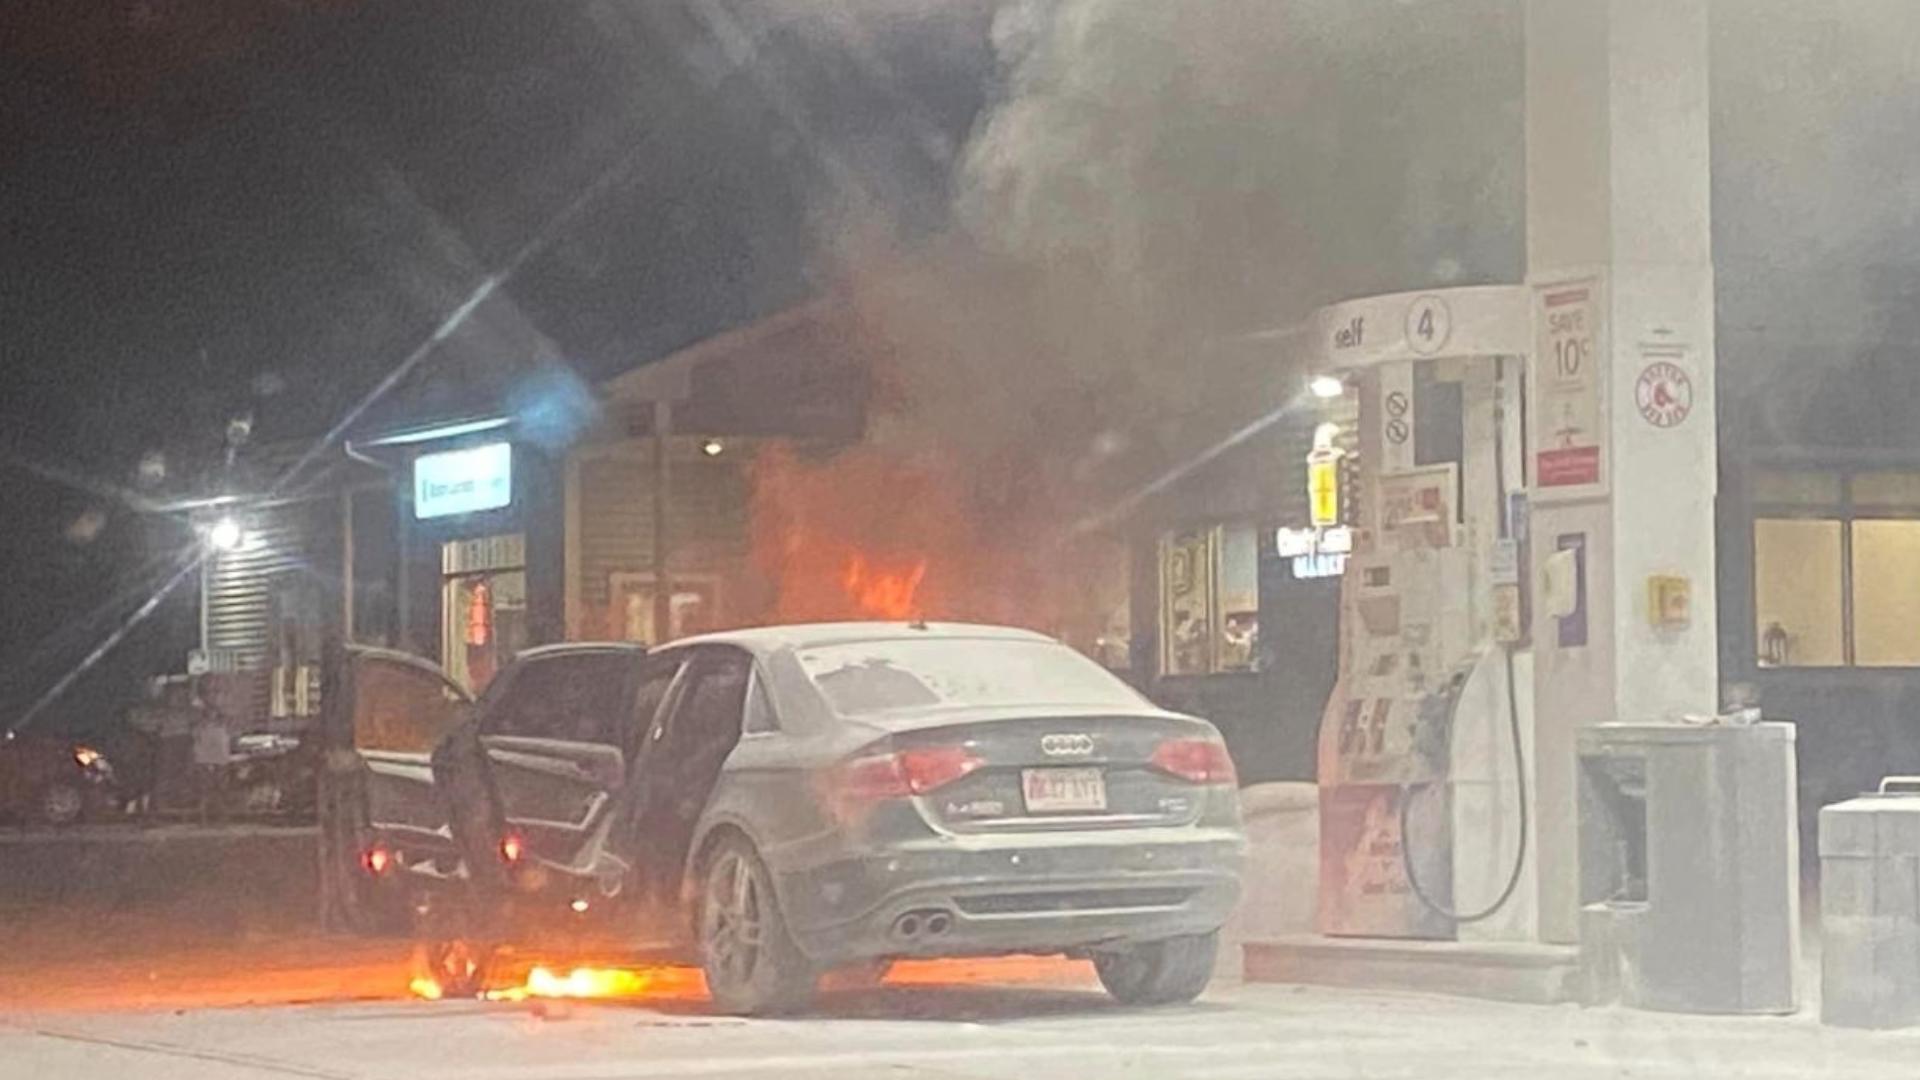 By the time emergency crews arrived at the gas station on Route 4, the vehicle was fully engulfed in flames, according to Turner Fire Chief Nicholas Merry.